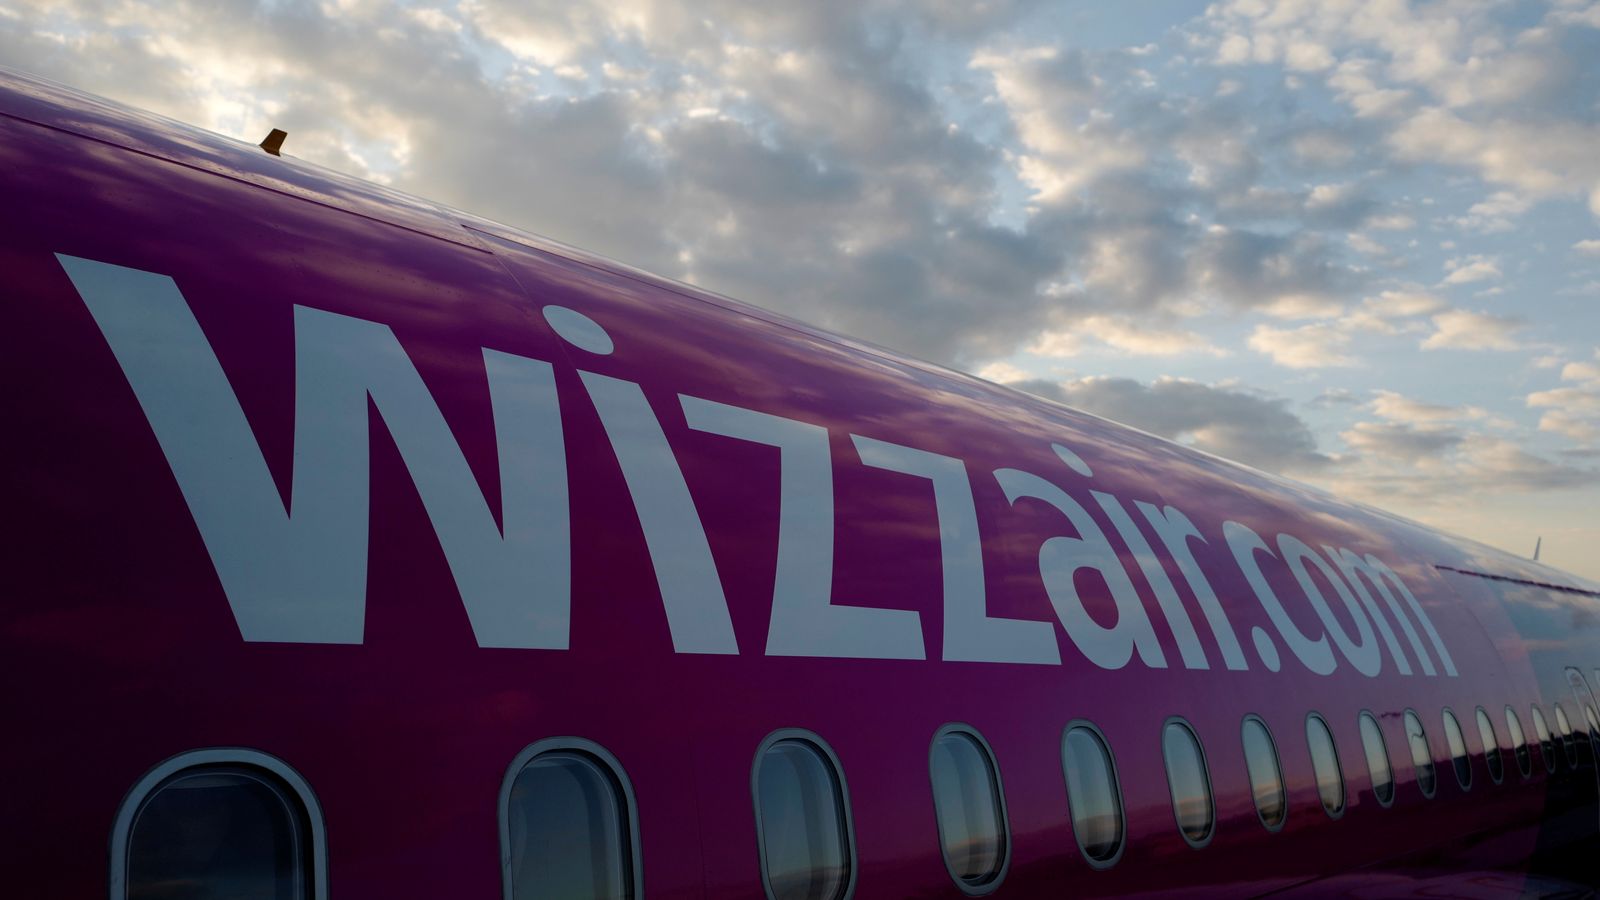 COVID-19: Wizz Air gives flight crews December deadline to get vaccinated